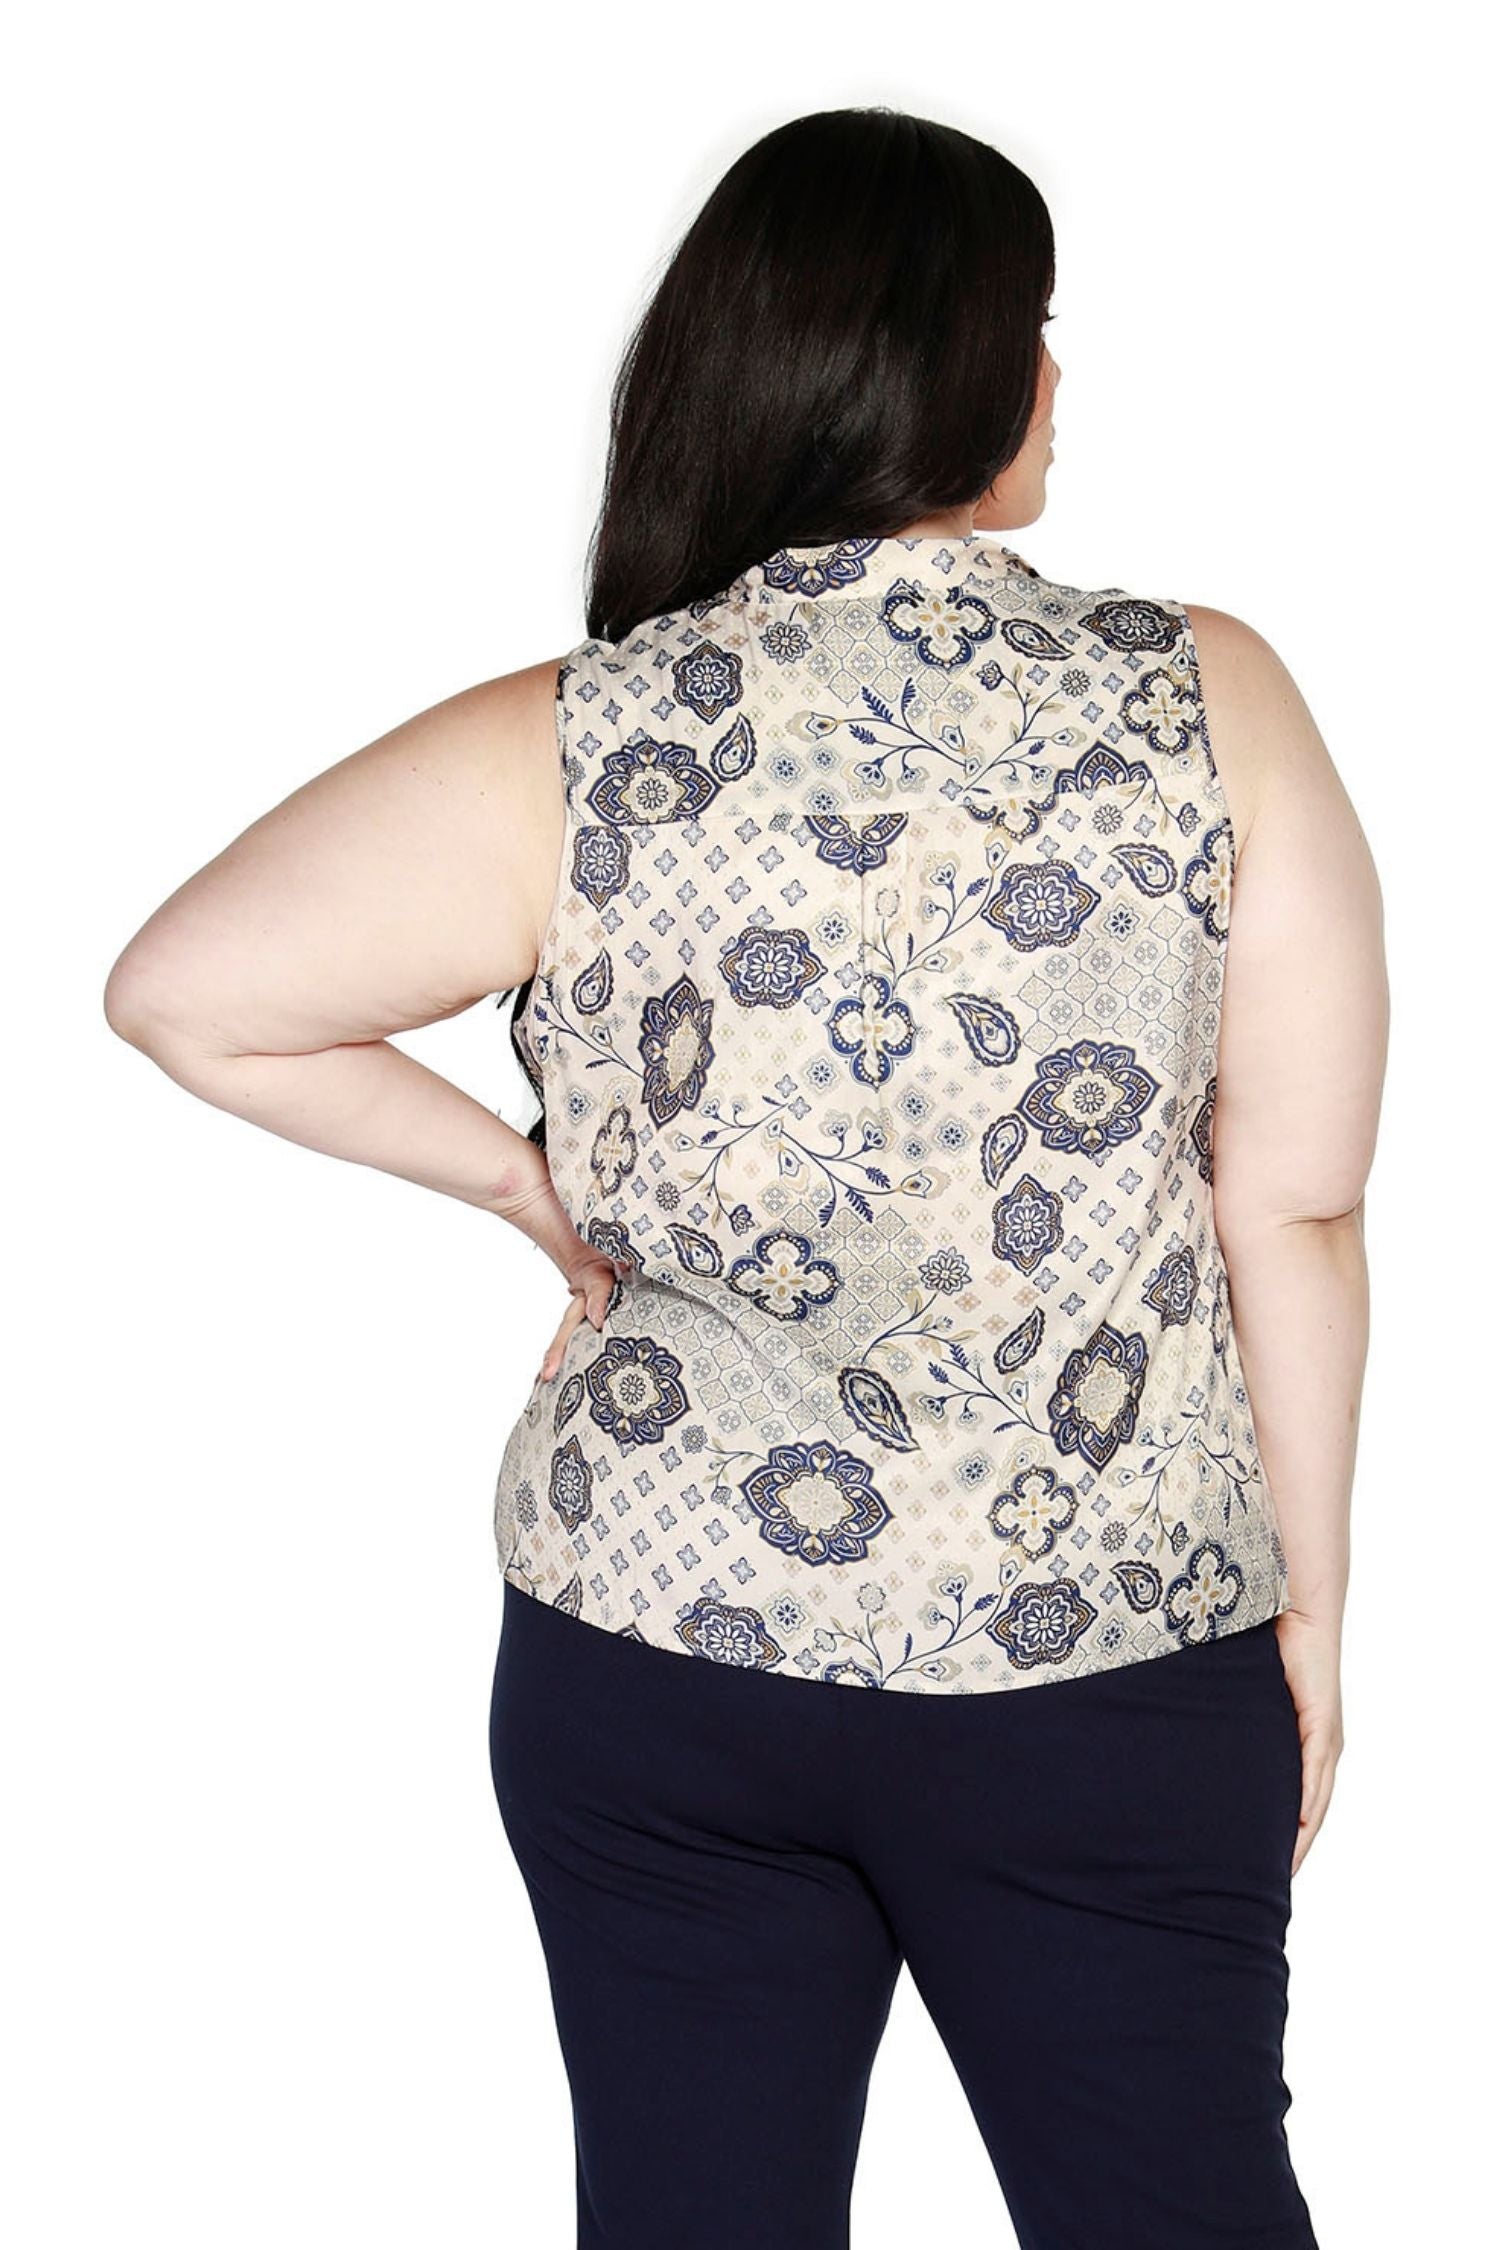 Women's Floral Paisley Halter Top with Keyhole Neckline | Curvy - LAST CALL